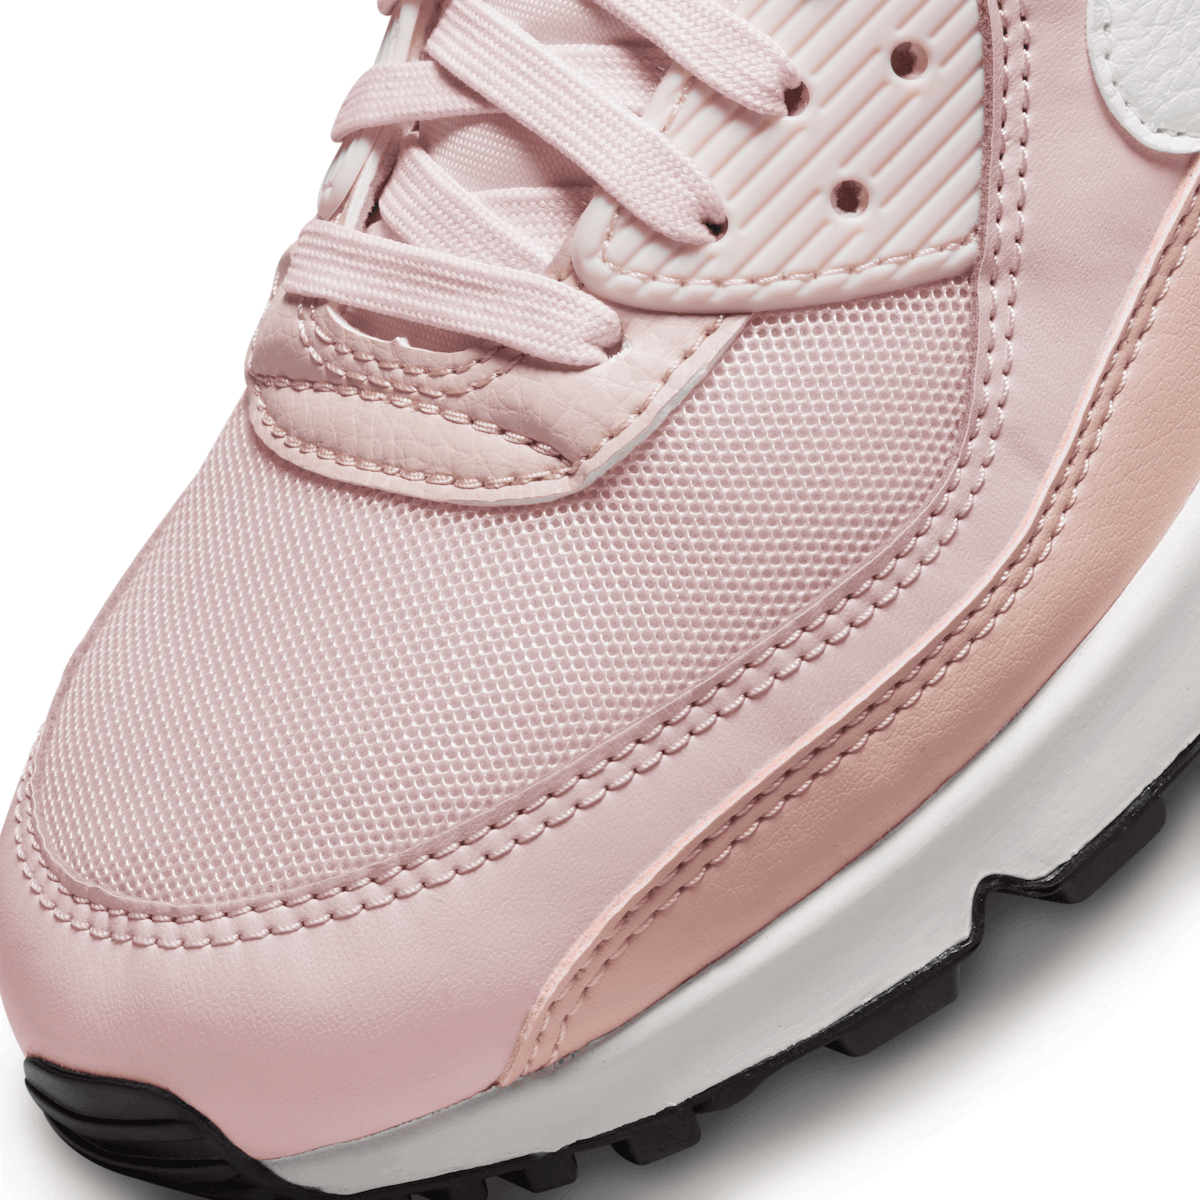 Nike Air Max 90 Barely Rose Pink Oxford Black (W) Angle 5